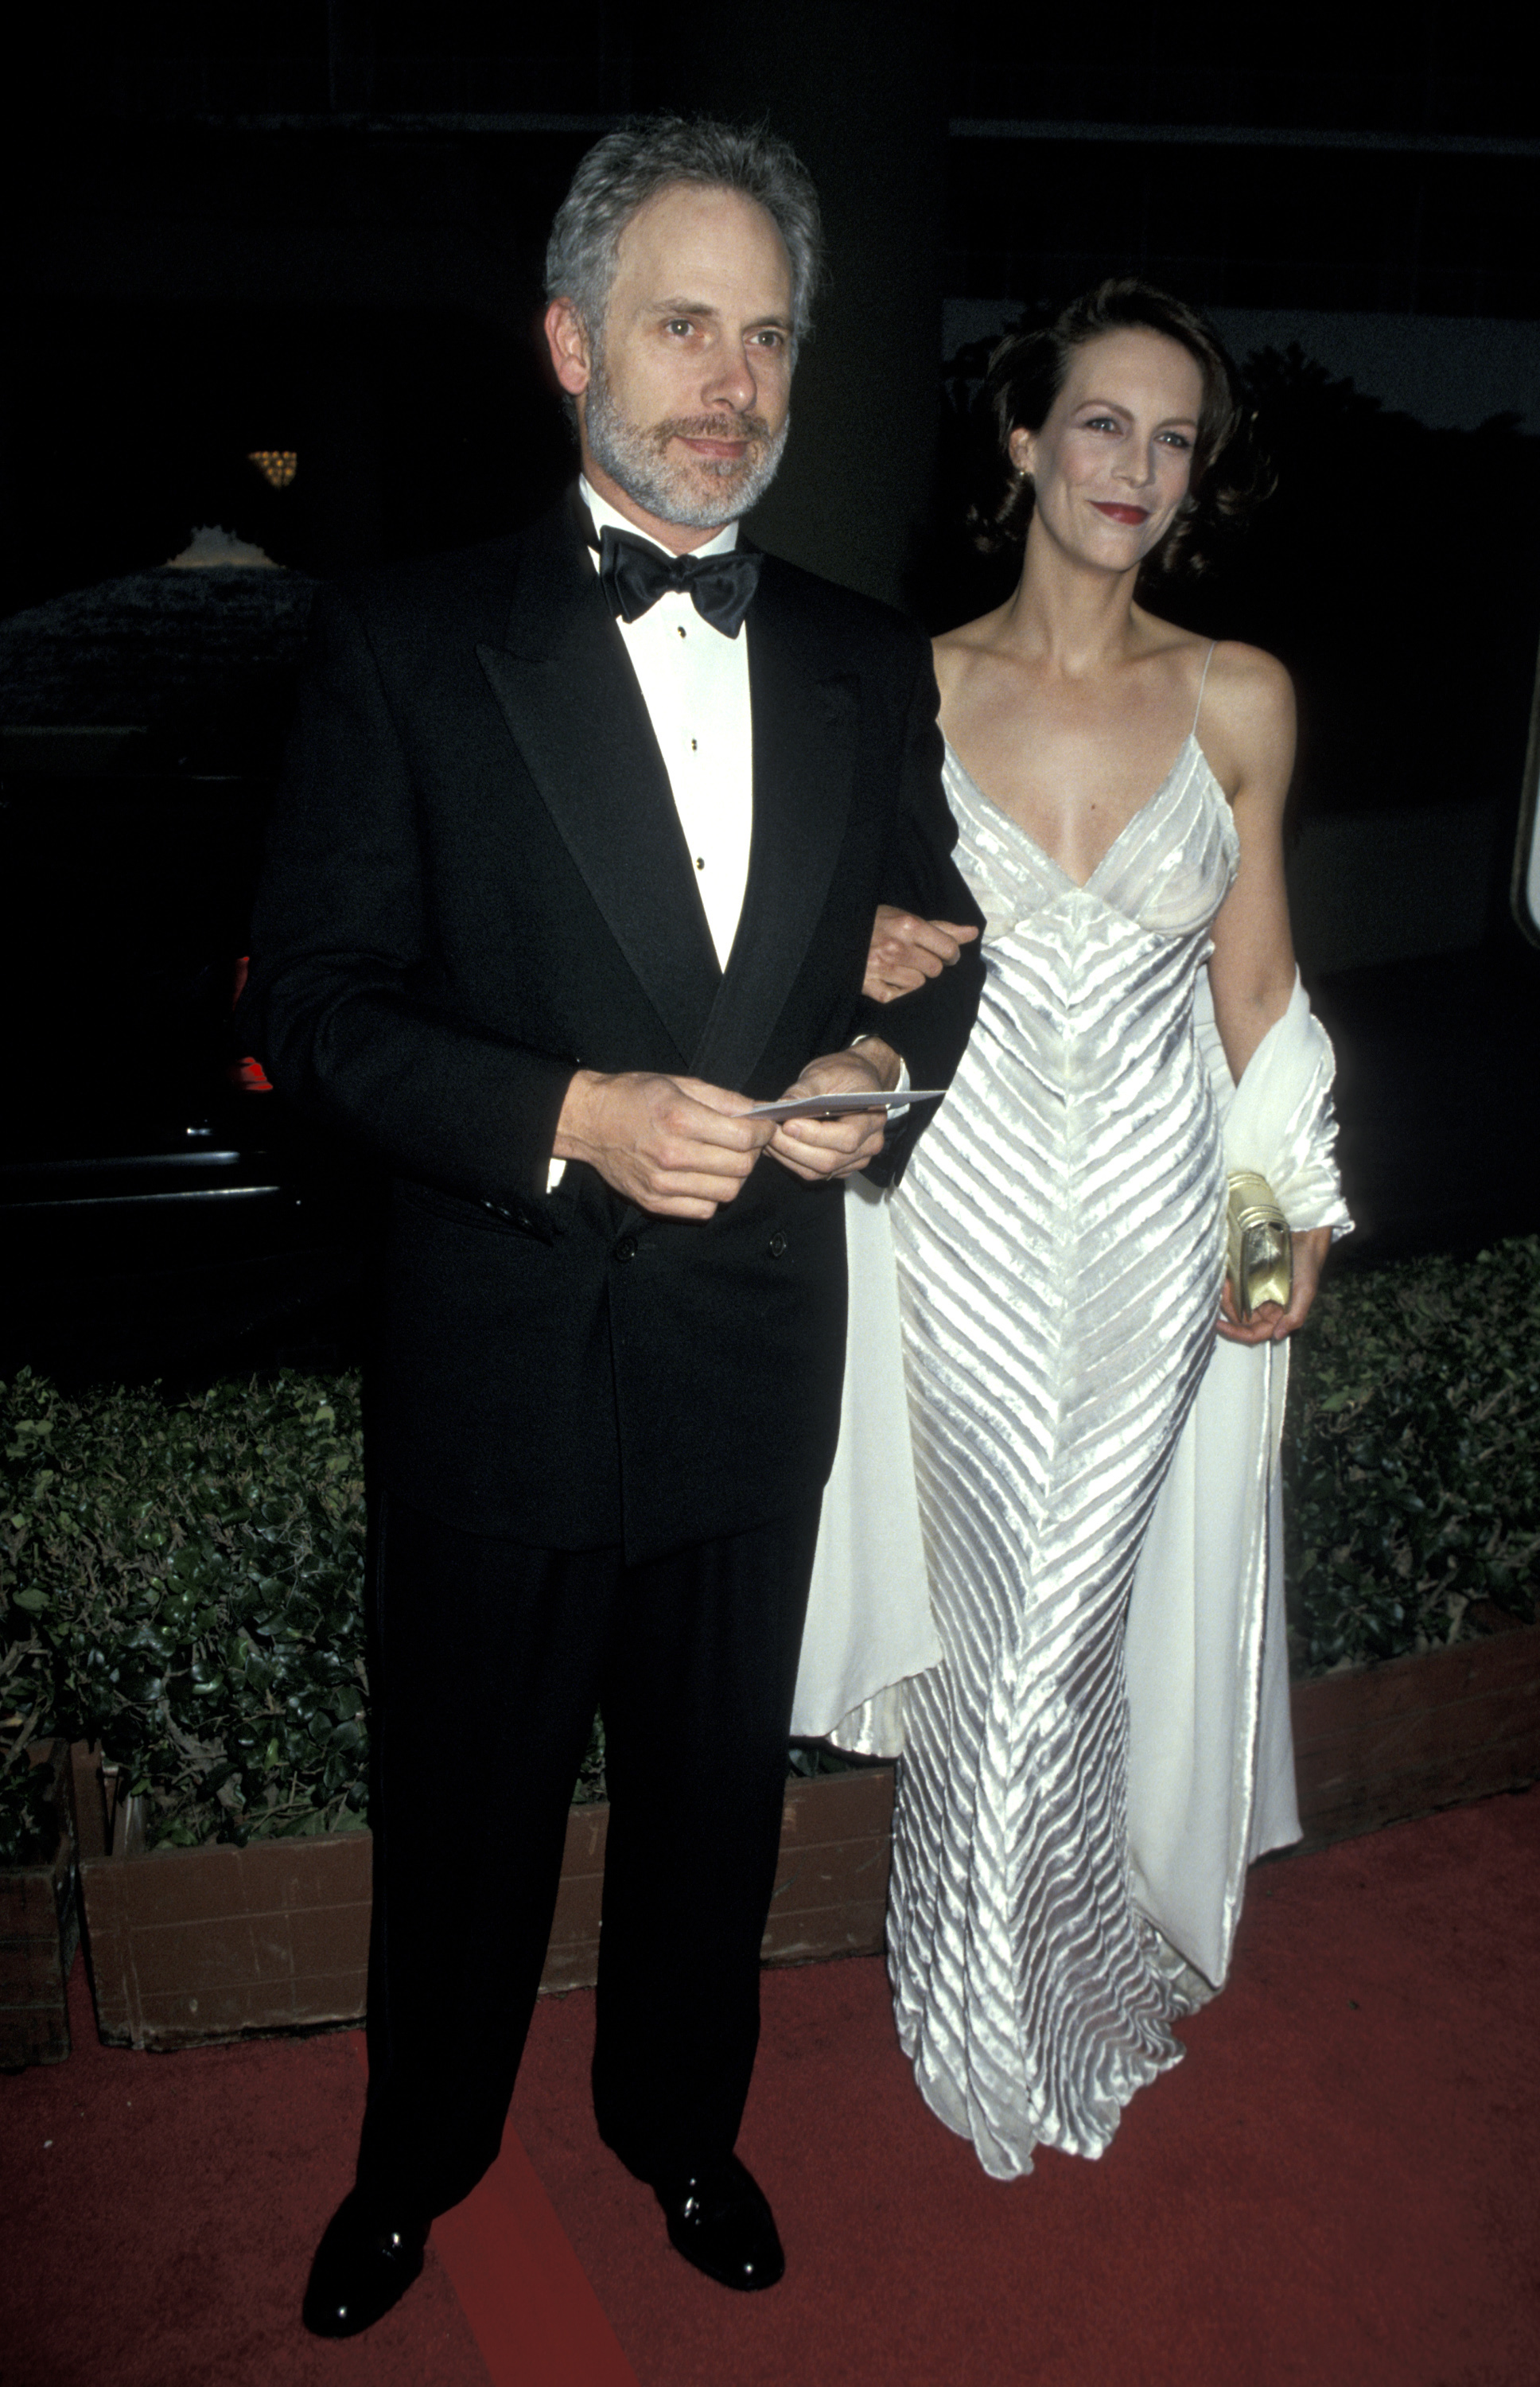 Christopher Guest and Jamie Lee Curtis during The 52nd Annual Golden Globe Awards at Beverly Hilton Hotel in Beverly Hills, California on January 21, 1995. | Source: Getty Images